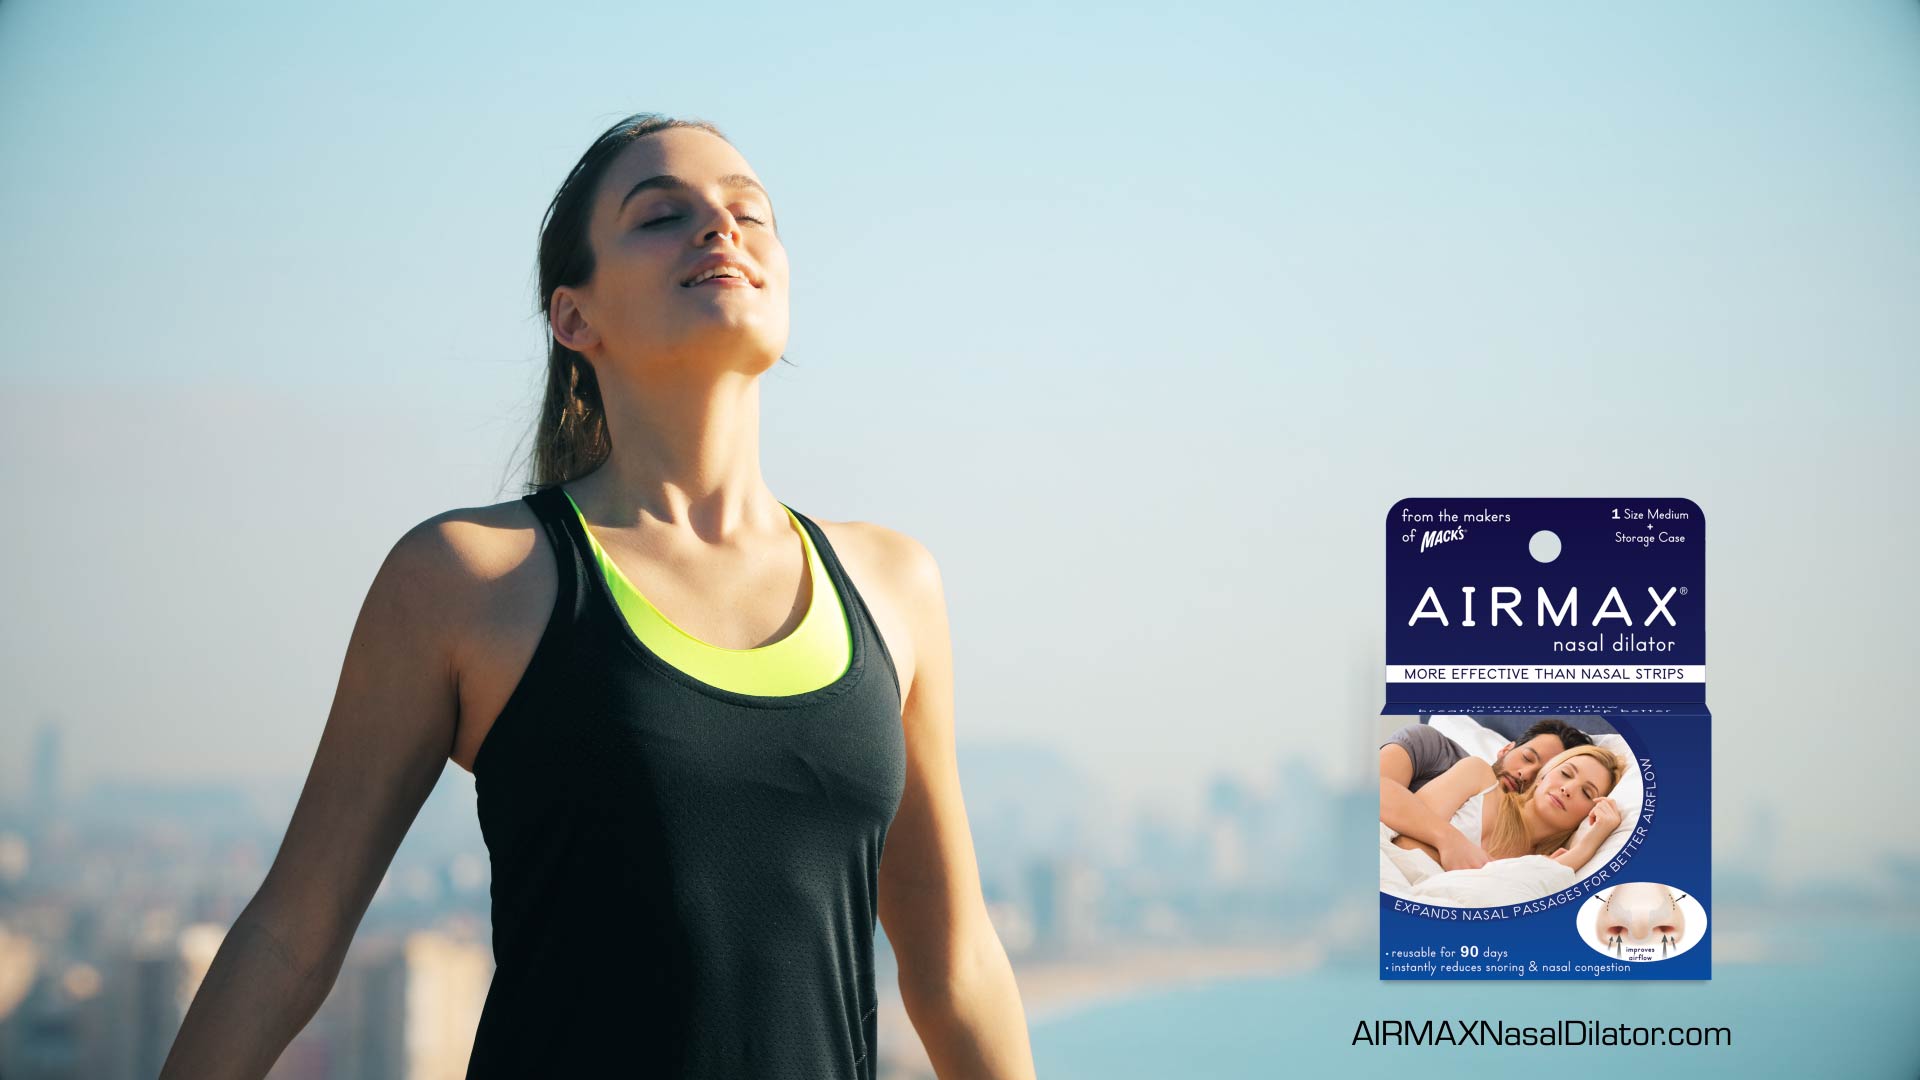 Better Breathing With AIRMAX Nasal Dilator